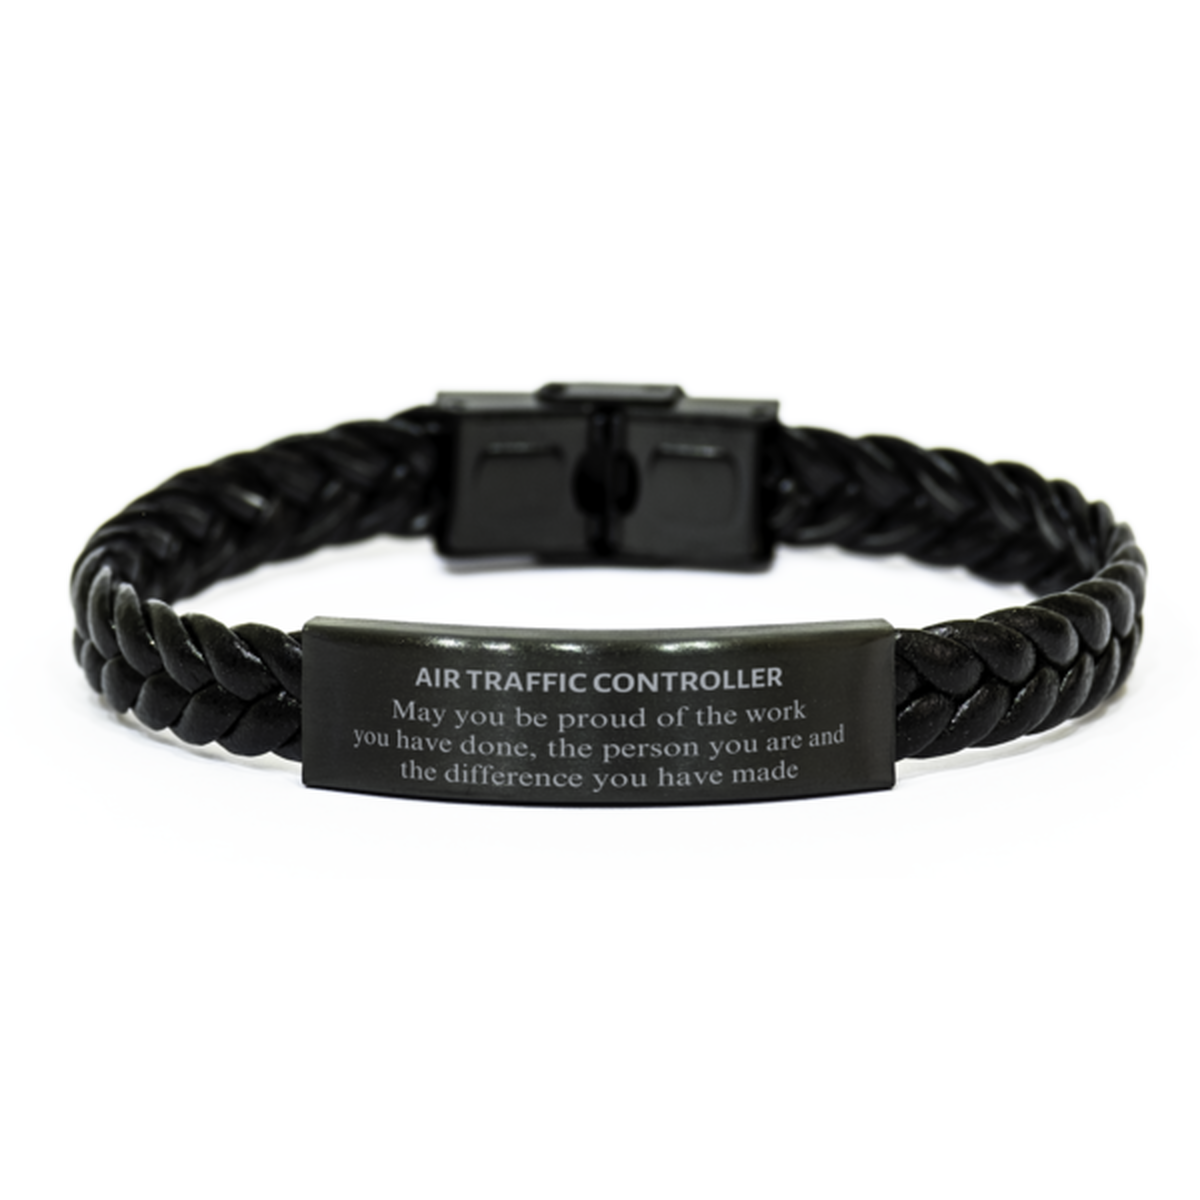 Air Traffic Controller May you be proud of the work you have done, Retirement Air Traffic Controller Braided Leather Bracelet for Colleague Appreciation Gifts Amazing for Air Traffic Controller